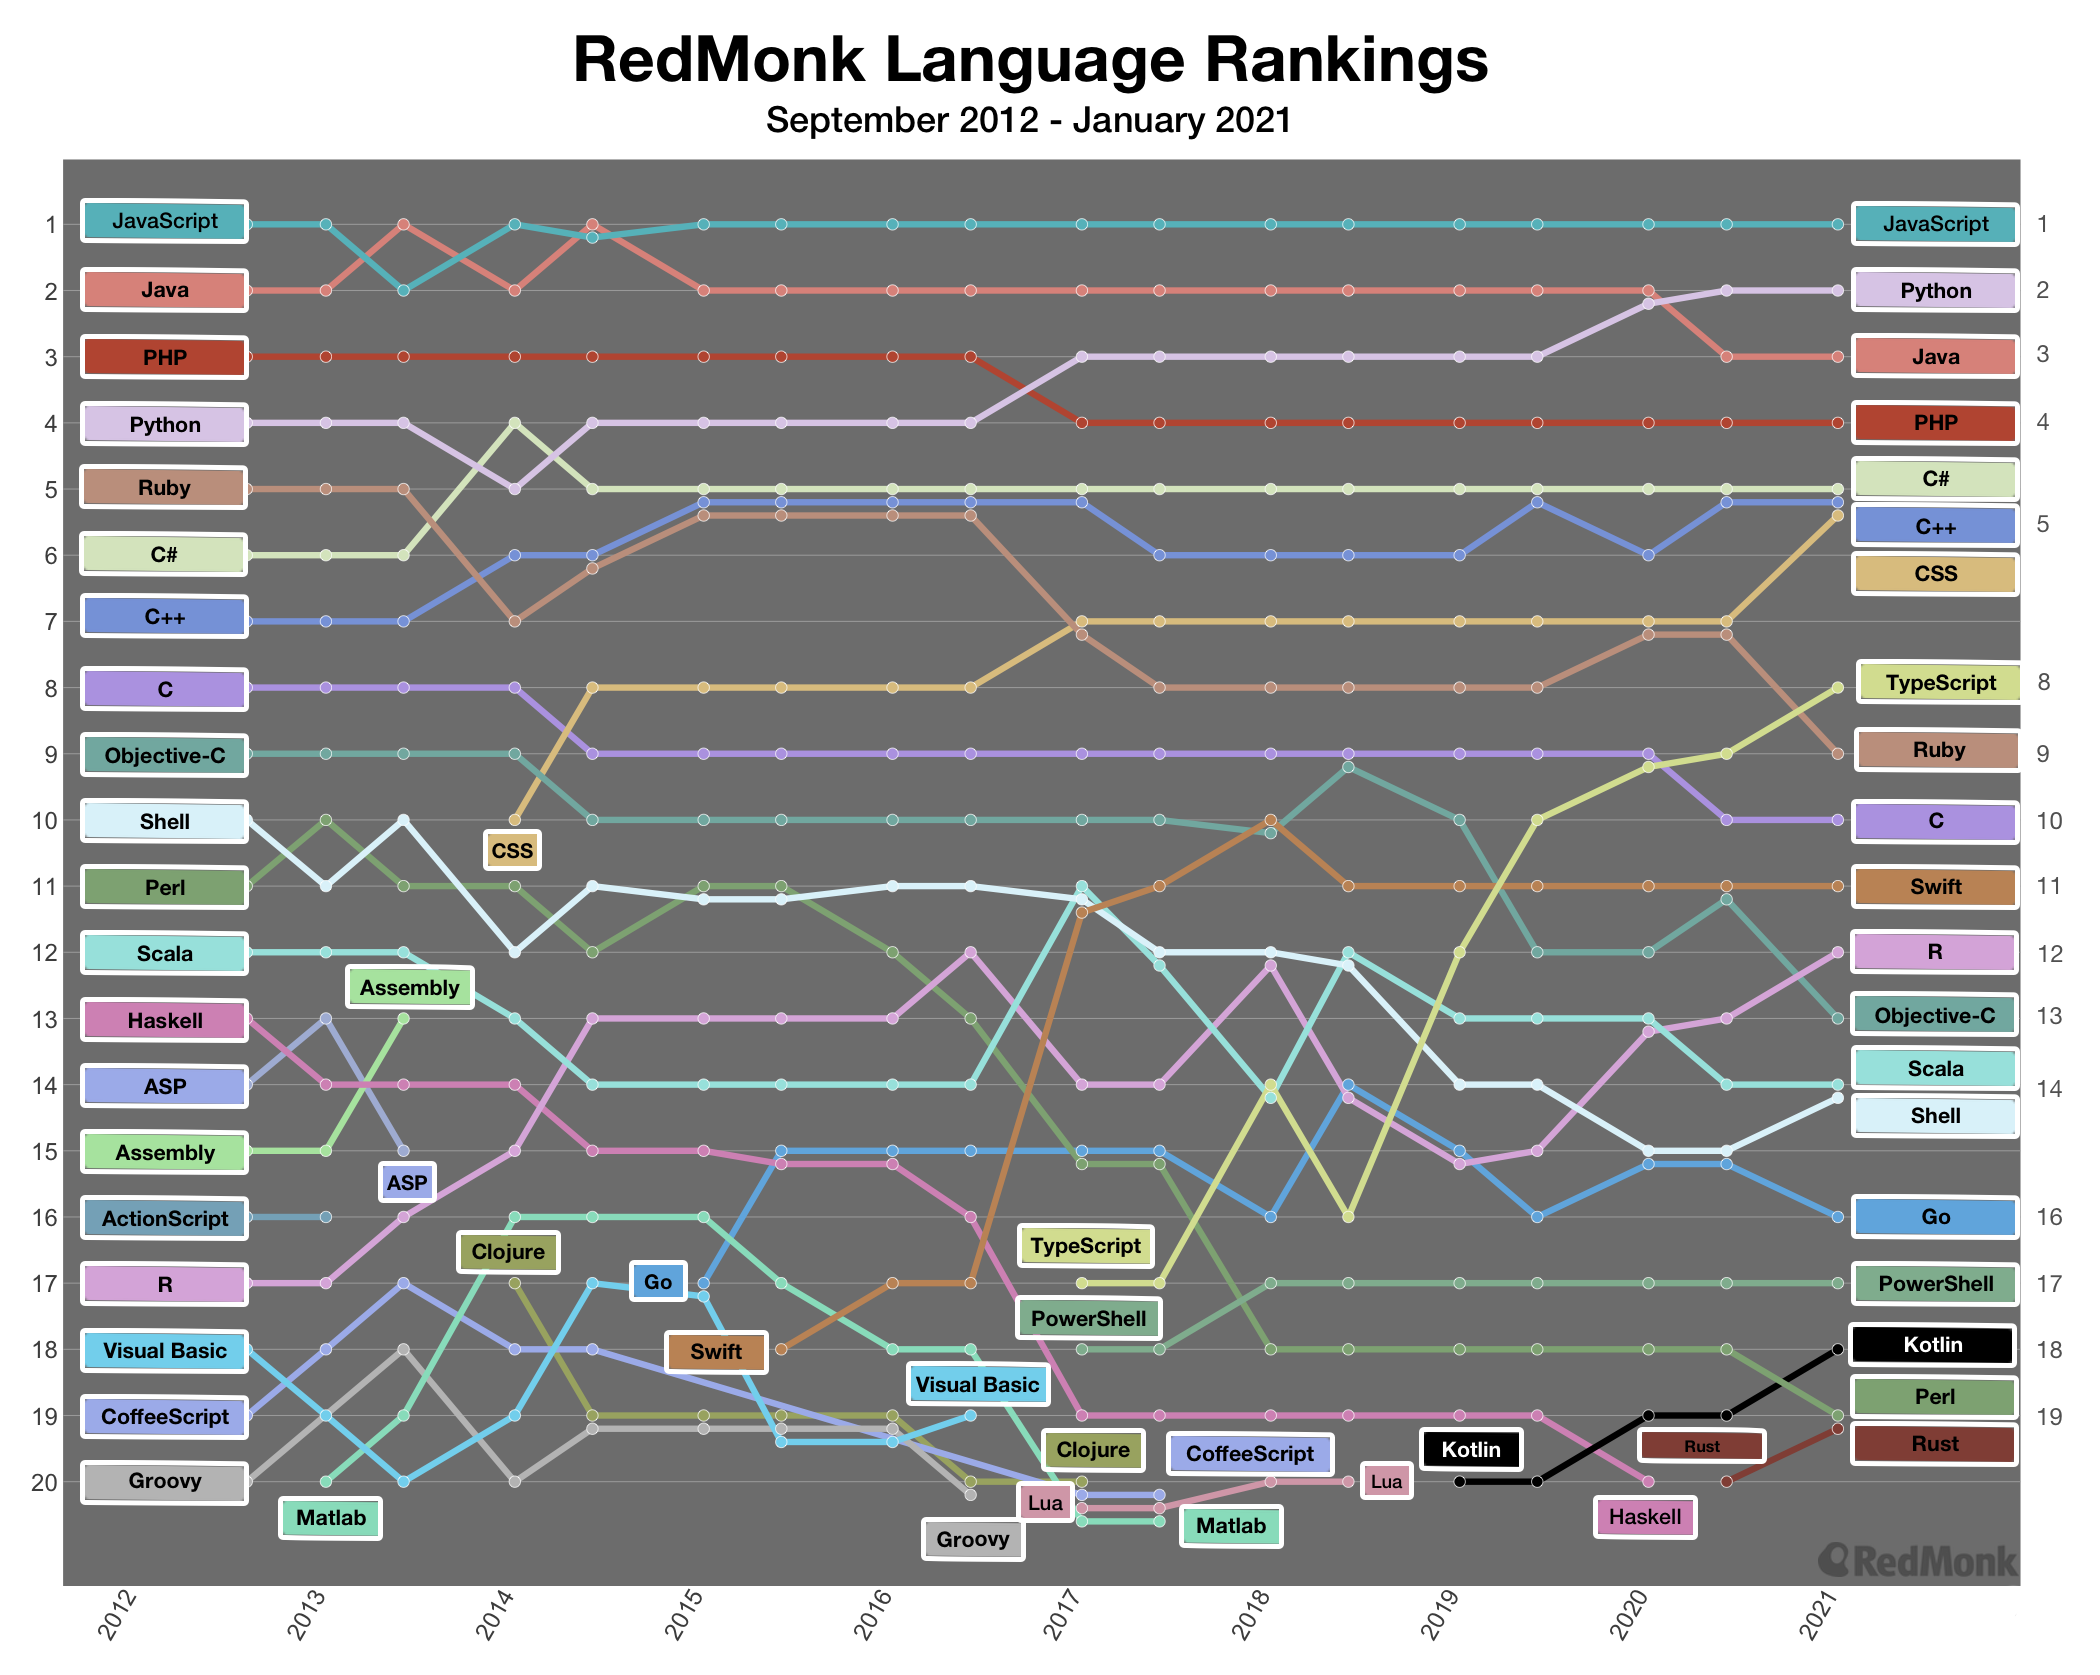 Chart tracking the Top 20 RedMonk Language rankings from September 2012 - January 2021